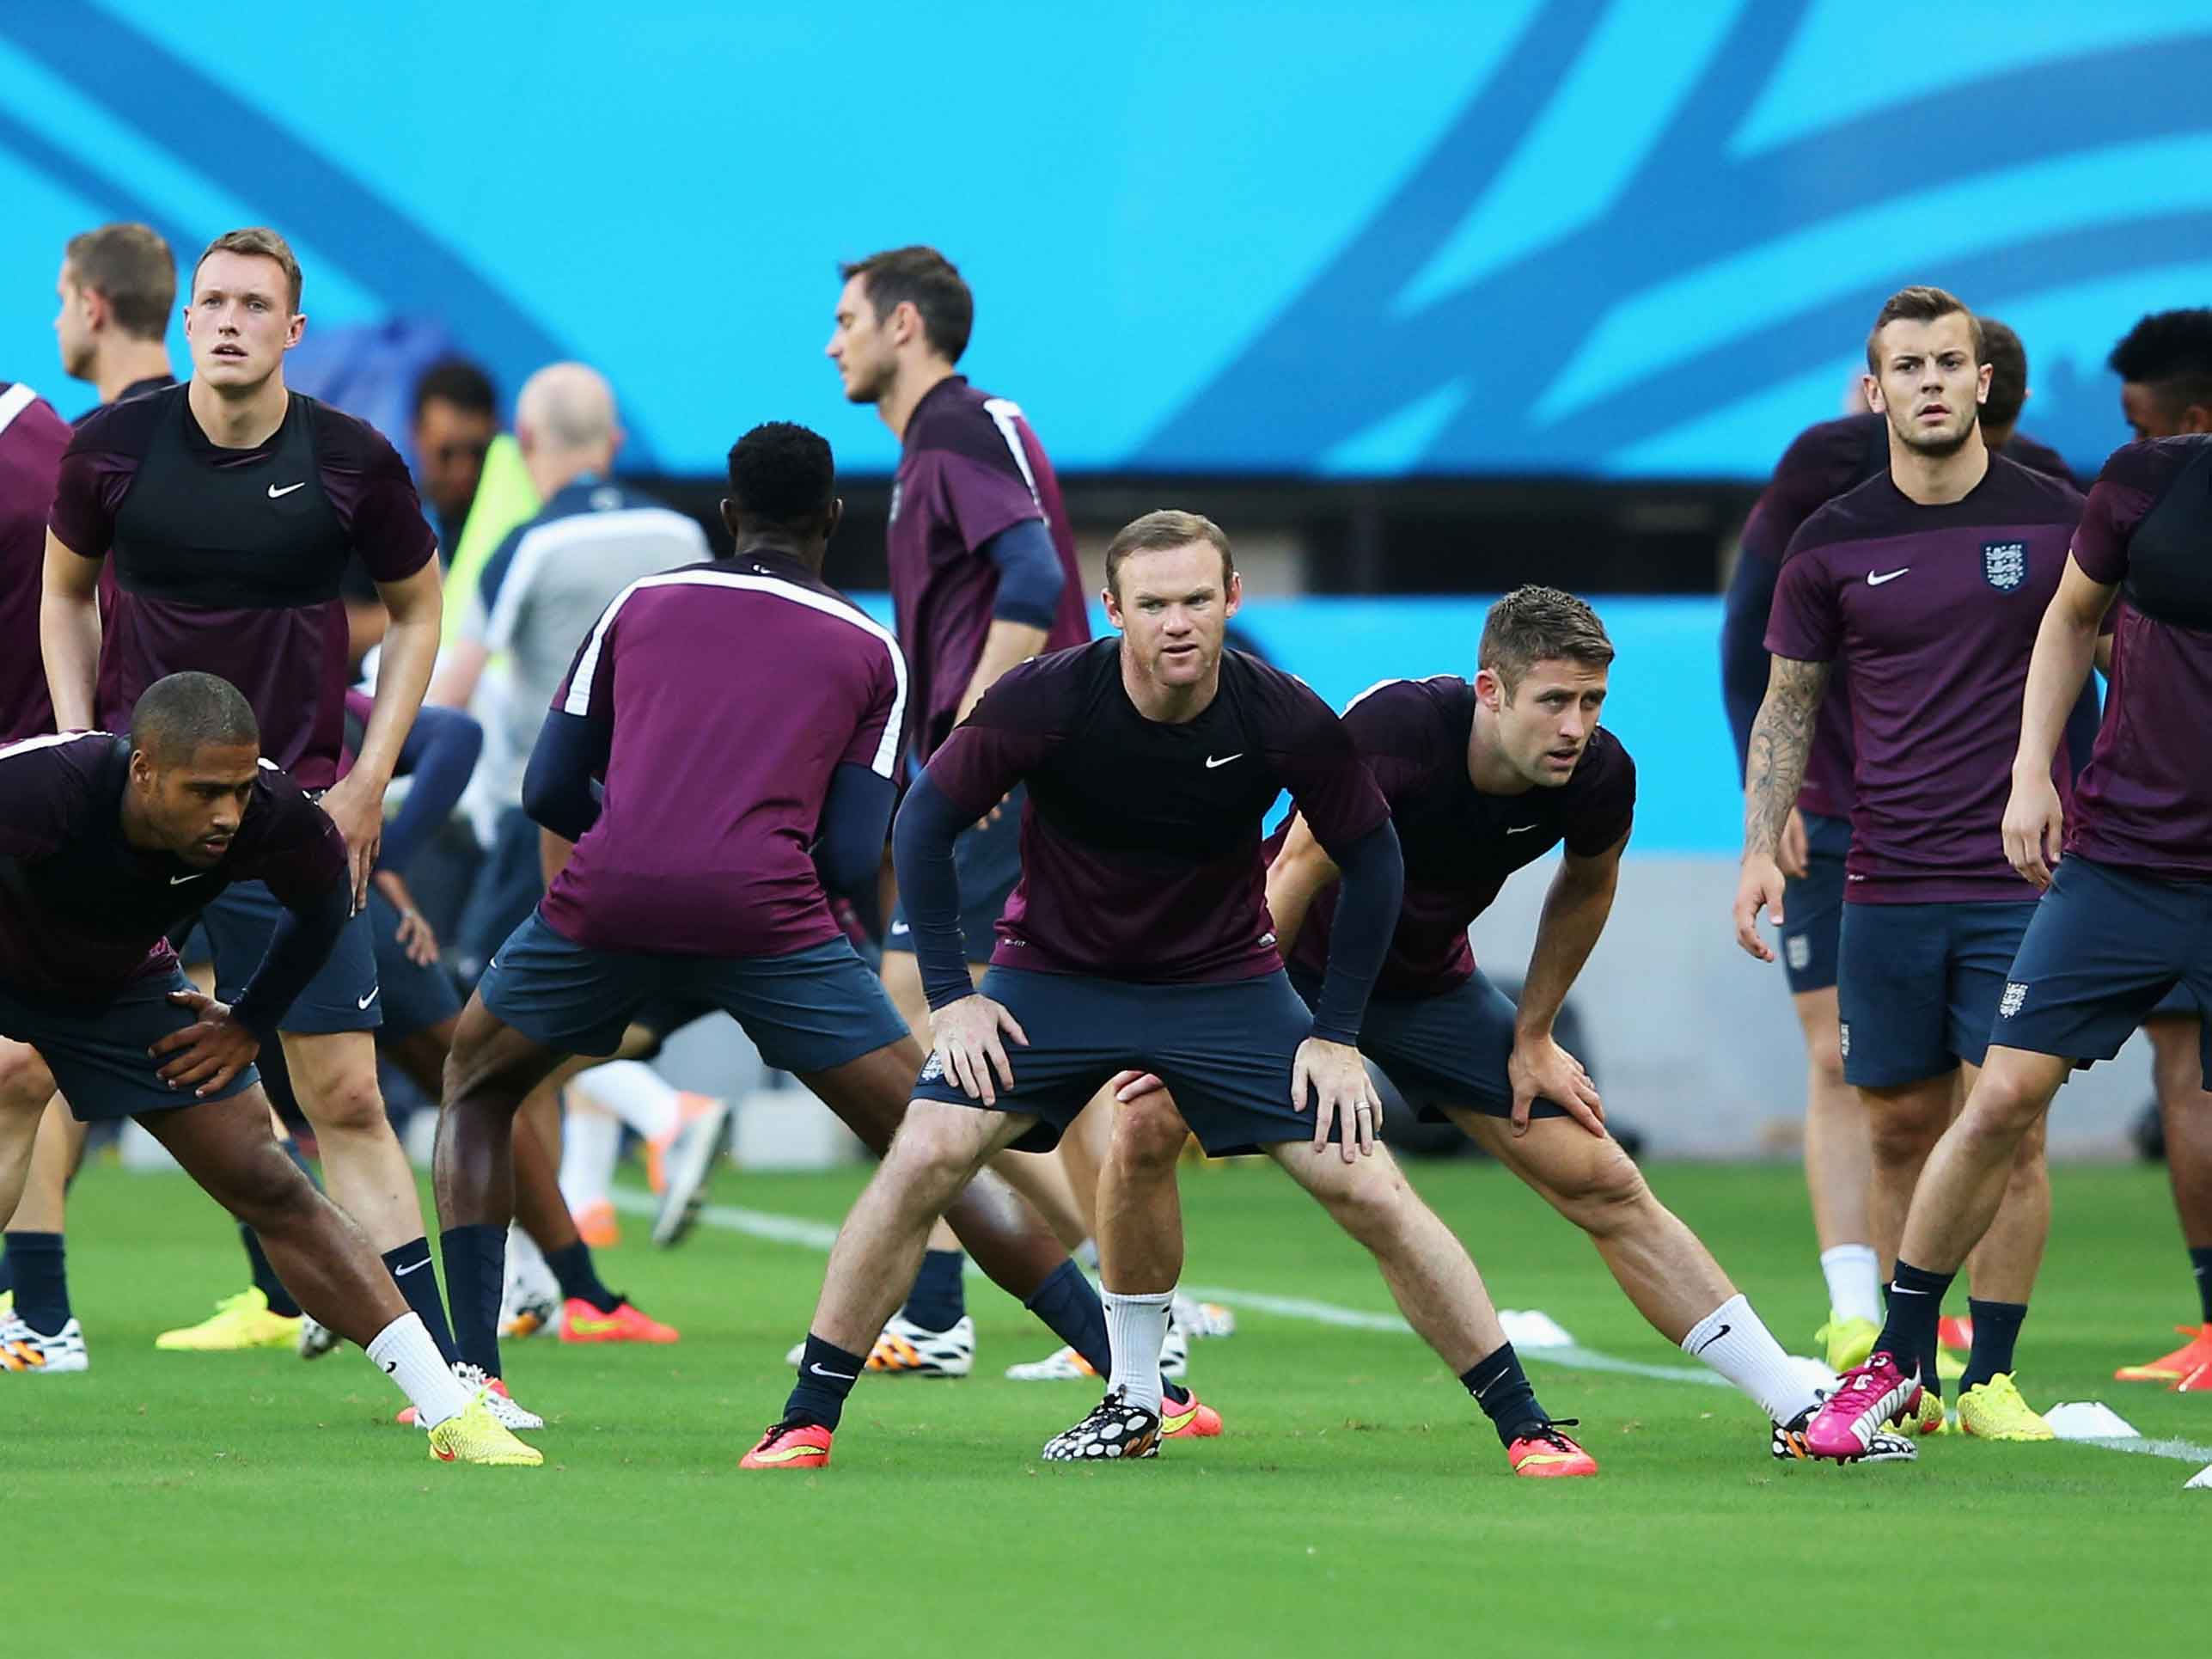 Wayne Rooney stretches with team mates during the England training session ahead of their first match of the 2014 World Cup Brazil against Italy at Arena Amazonia in Manaus, Brazil.